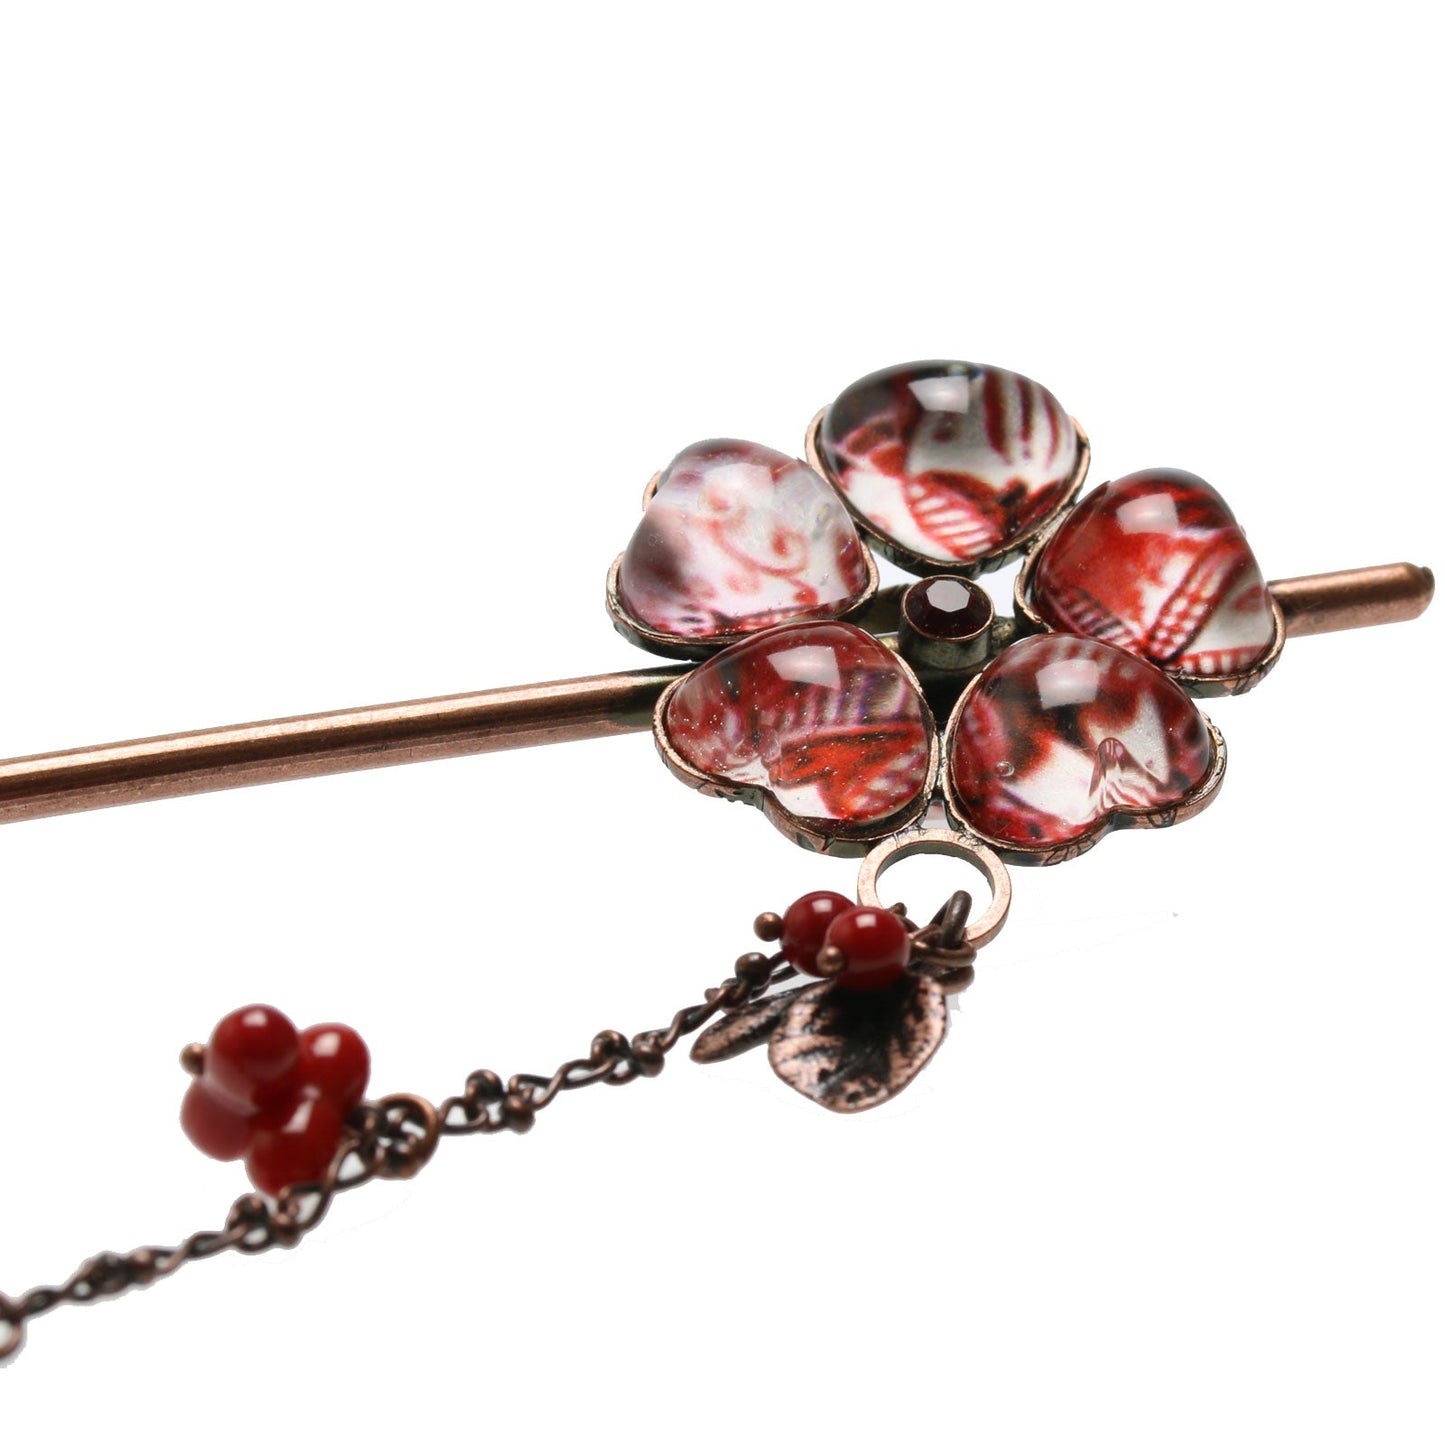 One Stick Hairpin Lily Flower Red TAMARUSAN